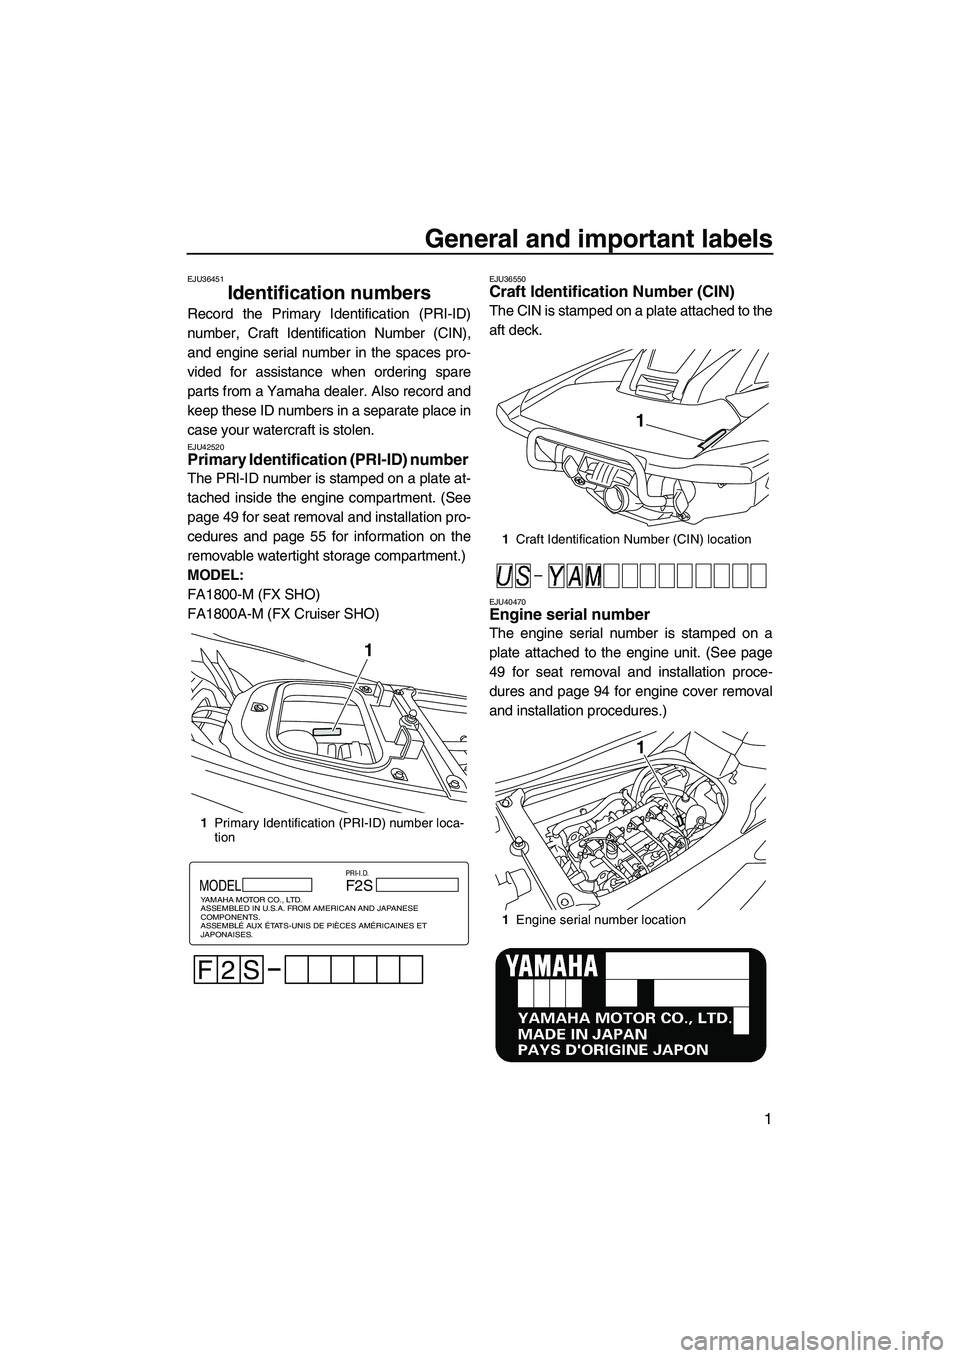 YAMAHA FX HO 2013  Owners Manual General and important labels
1
EJU36451
Identification numbers 
Record the Primary Identification (PRI-ID)
number, Craft Identification Number (CIN),
and engine serial number in the spaces pro-
vided 